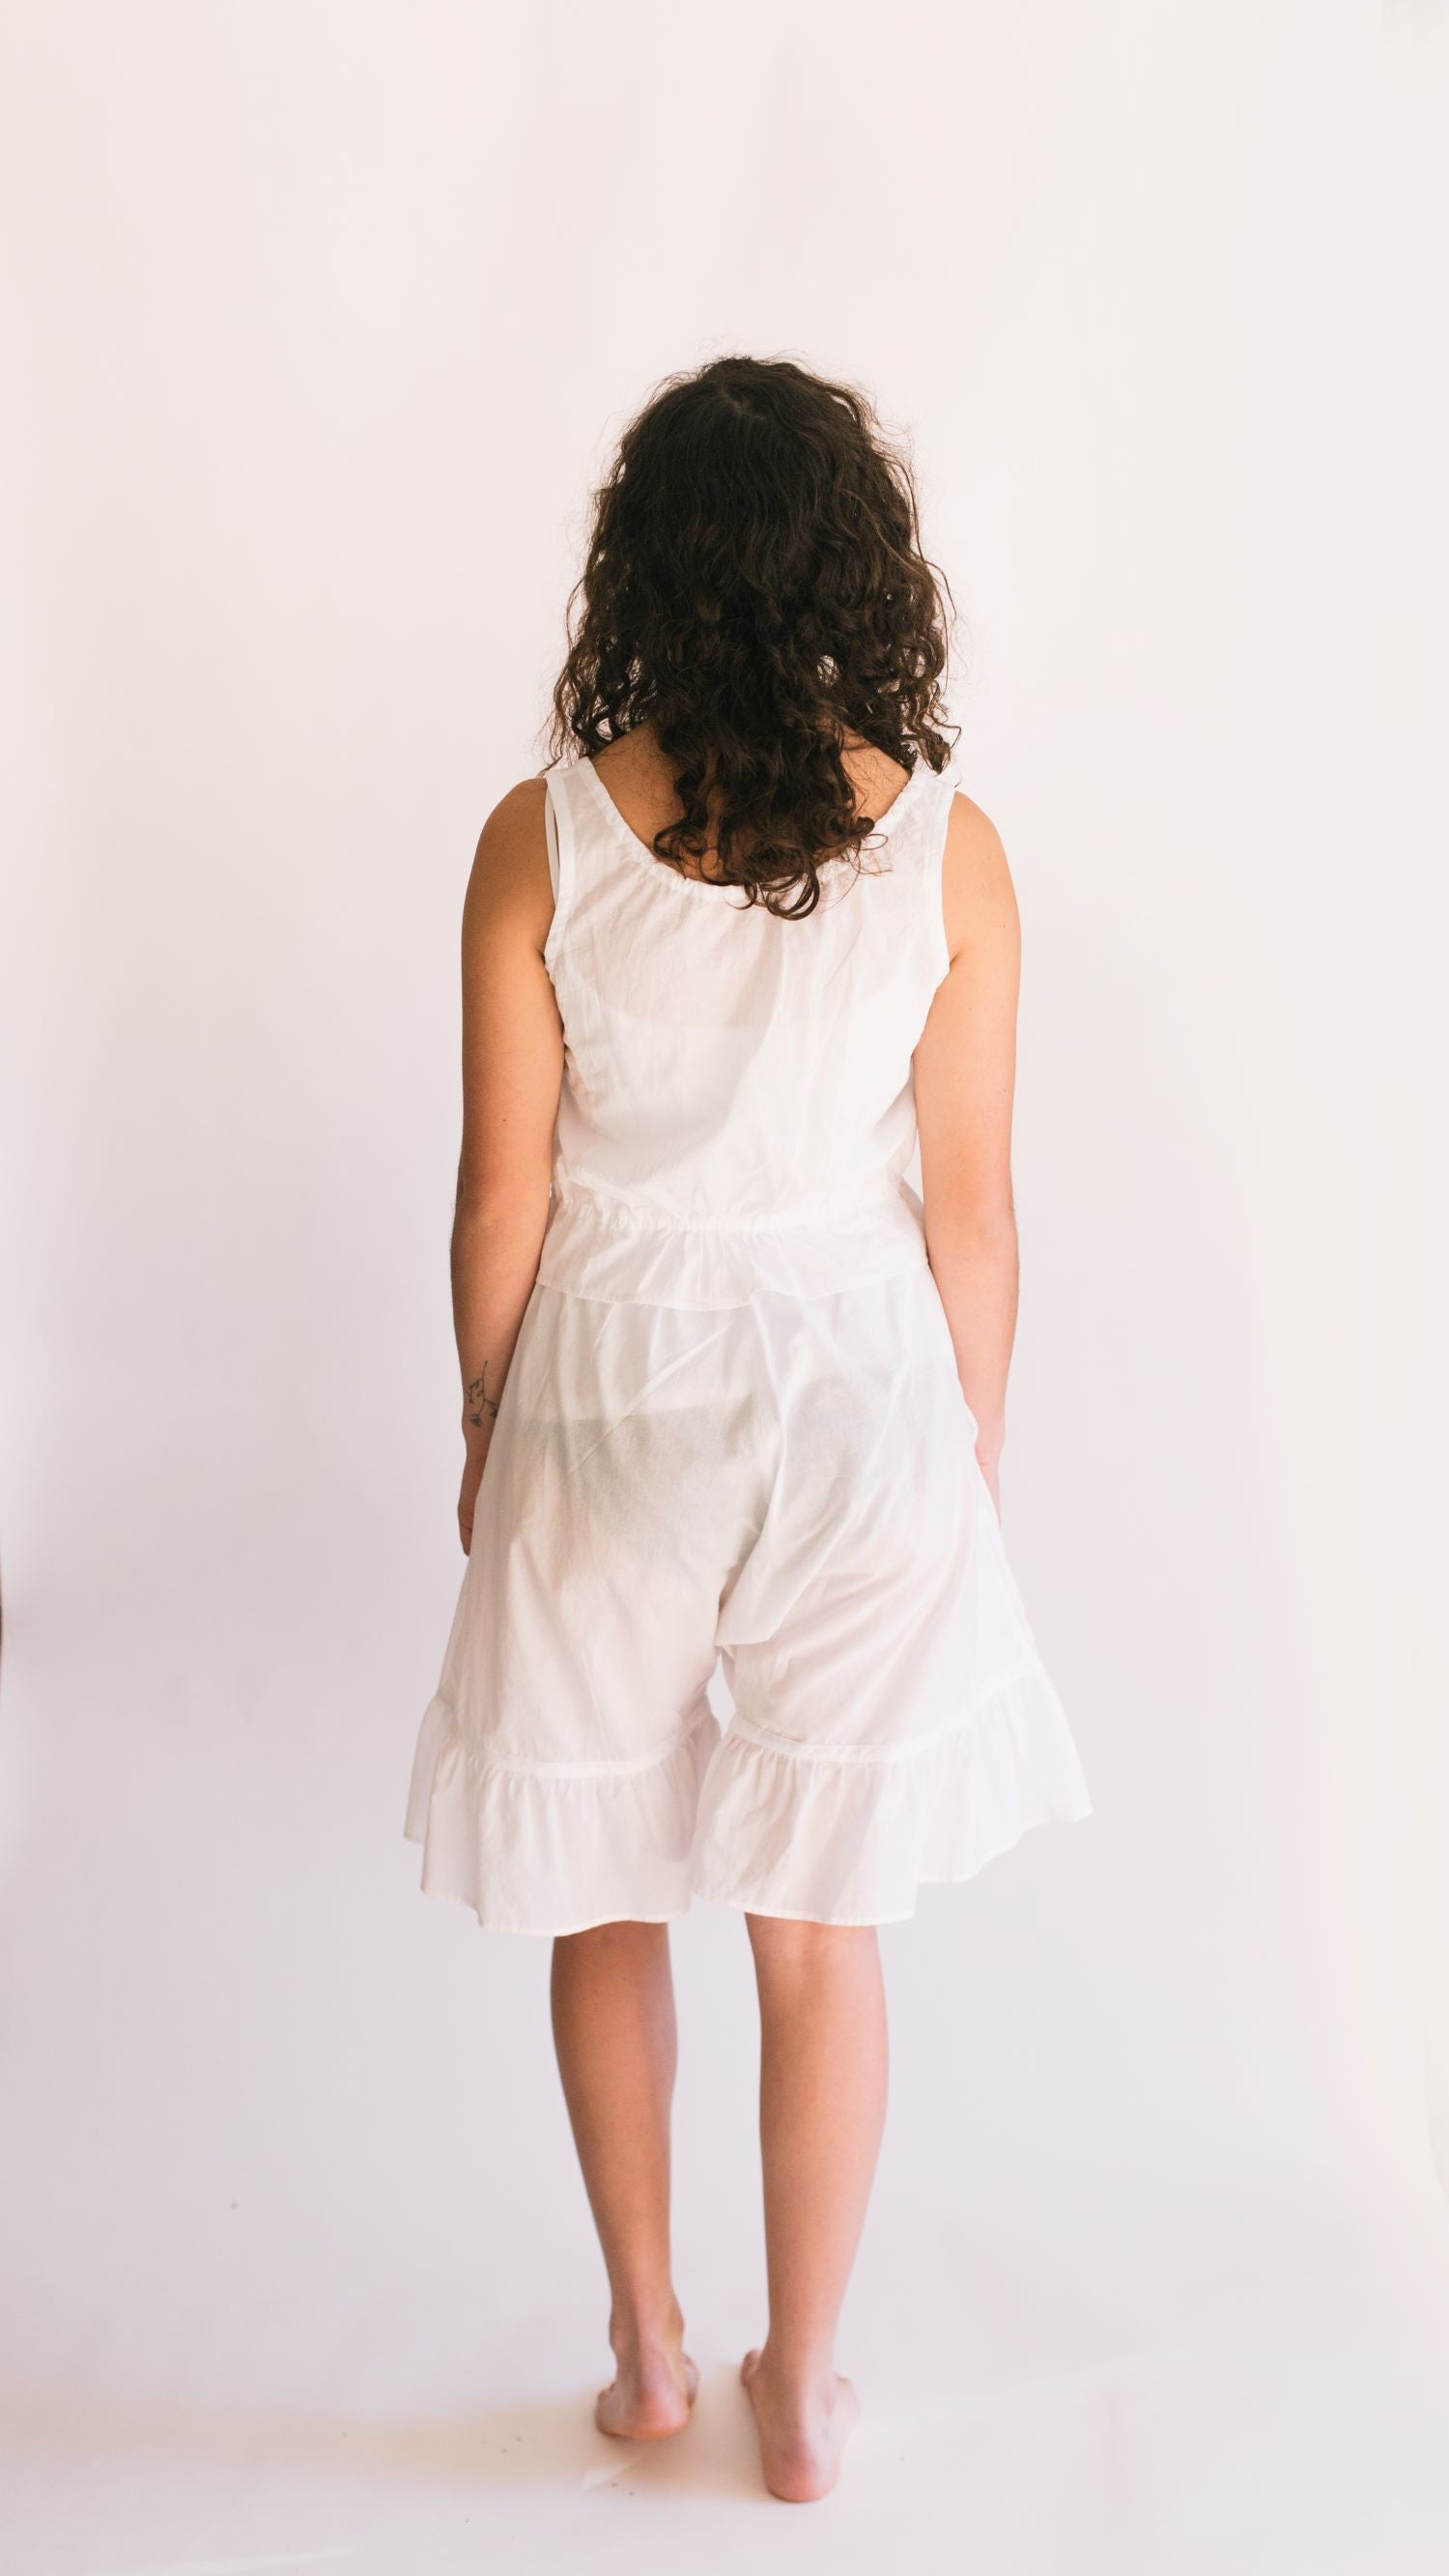 Photo of back view of young woman wearing camisole and drawers.